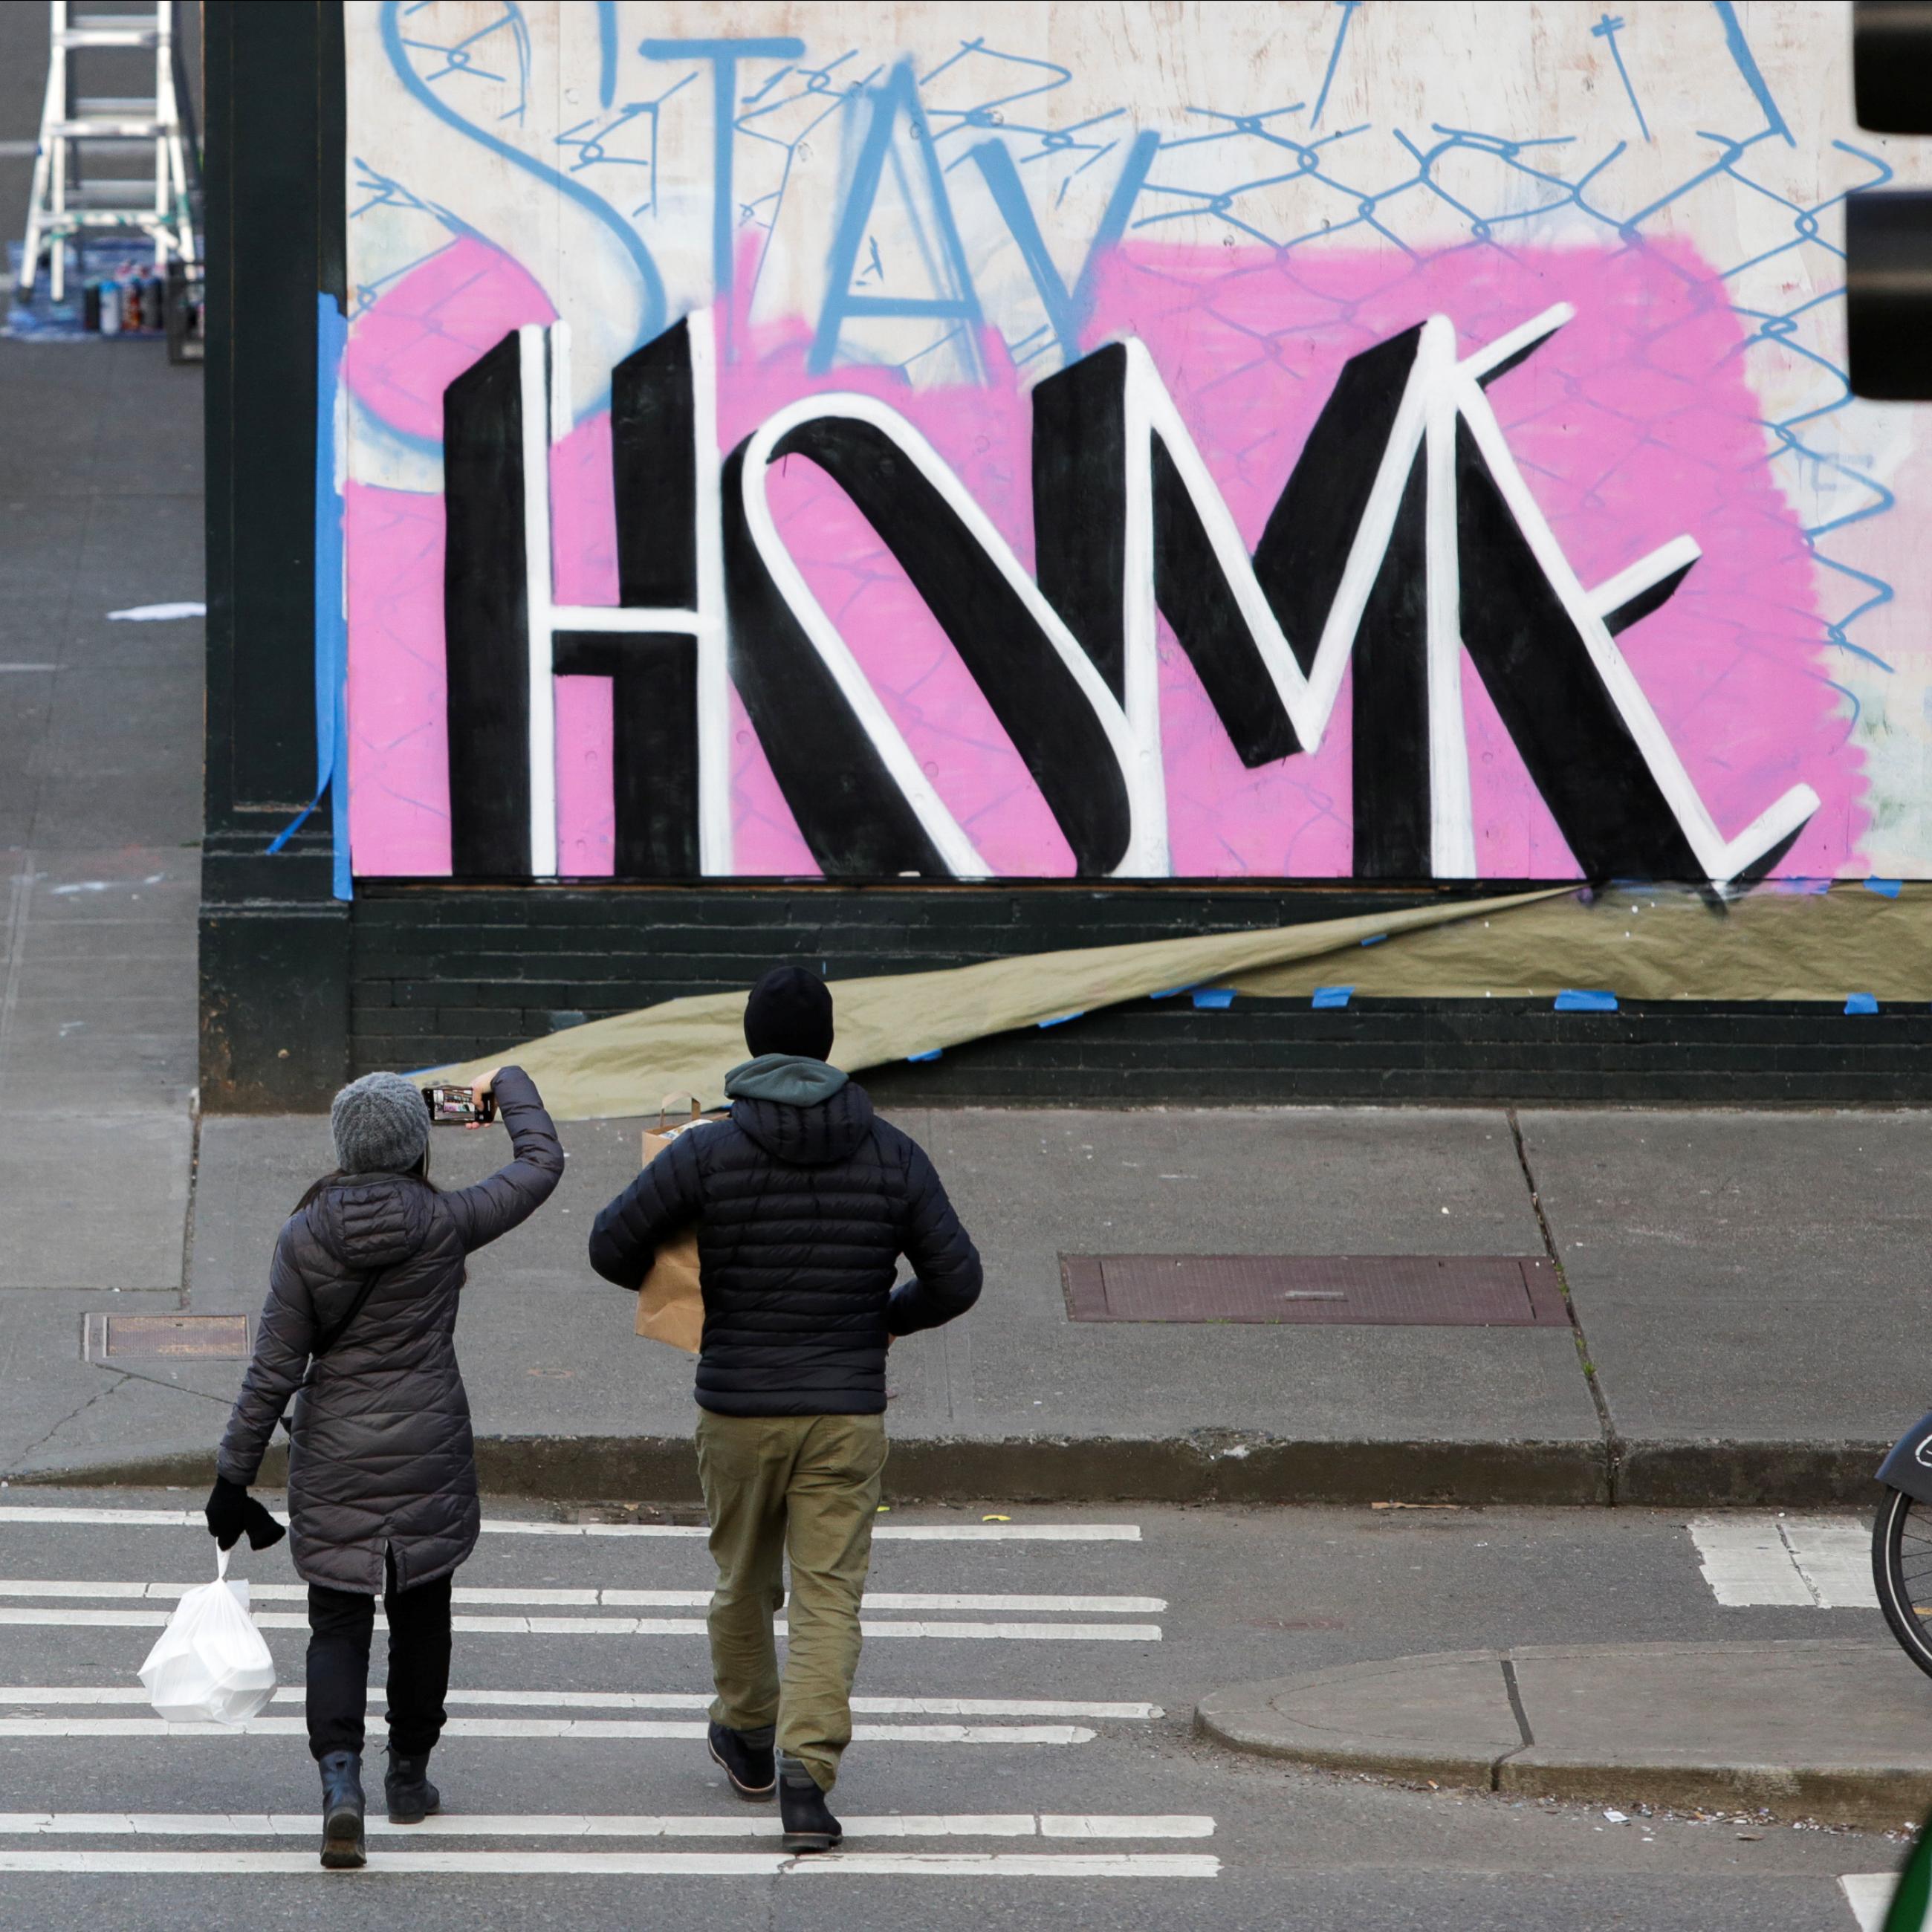 A couple totess take out food as they walk near street art with the message "stay home," on April 2, 2020, the same day that Washington Governor Jay Inslee extended a stay-home order to slow the spread of COVID-19 in Seattle, Washington.